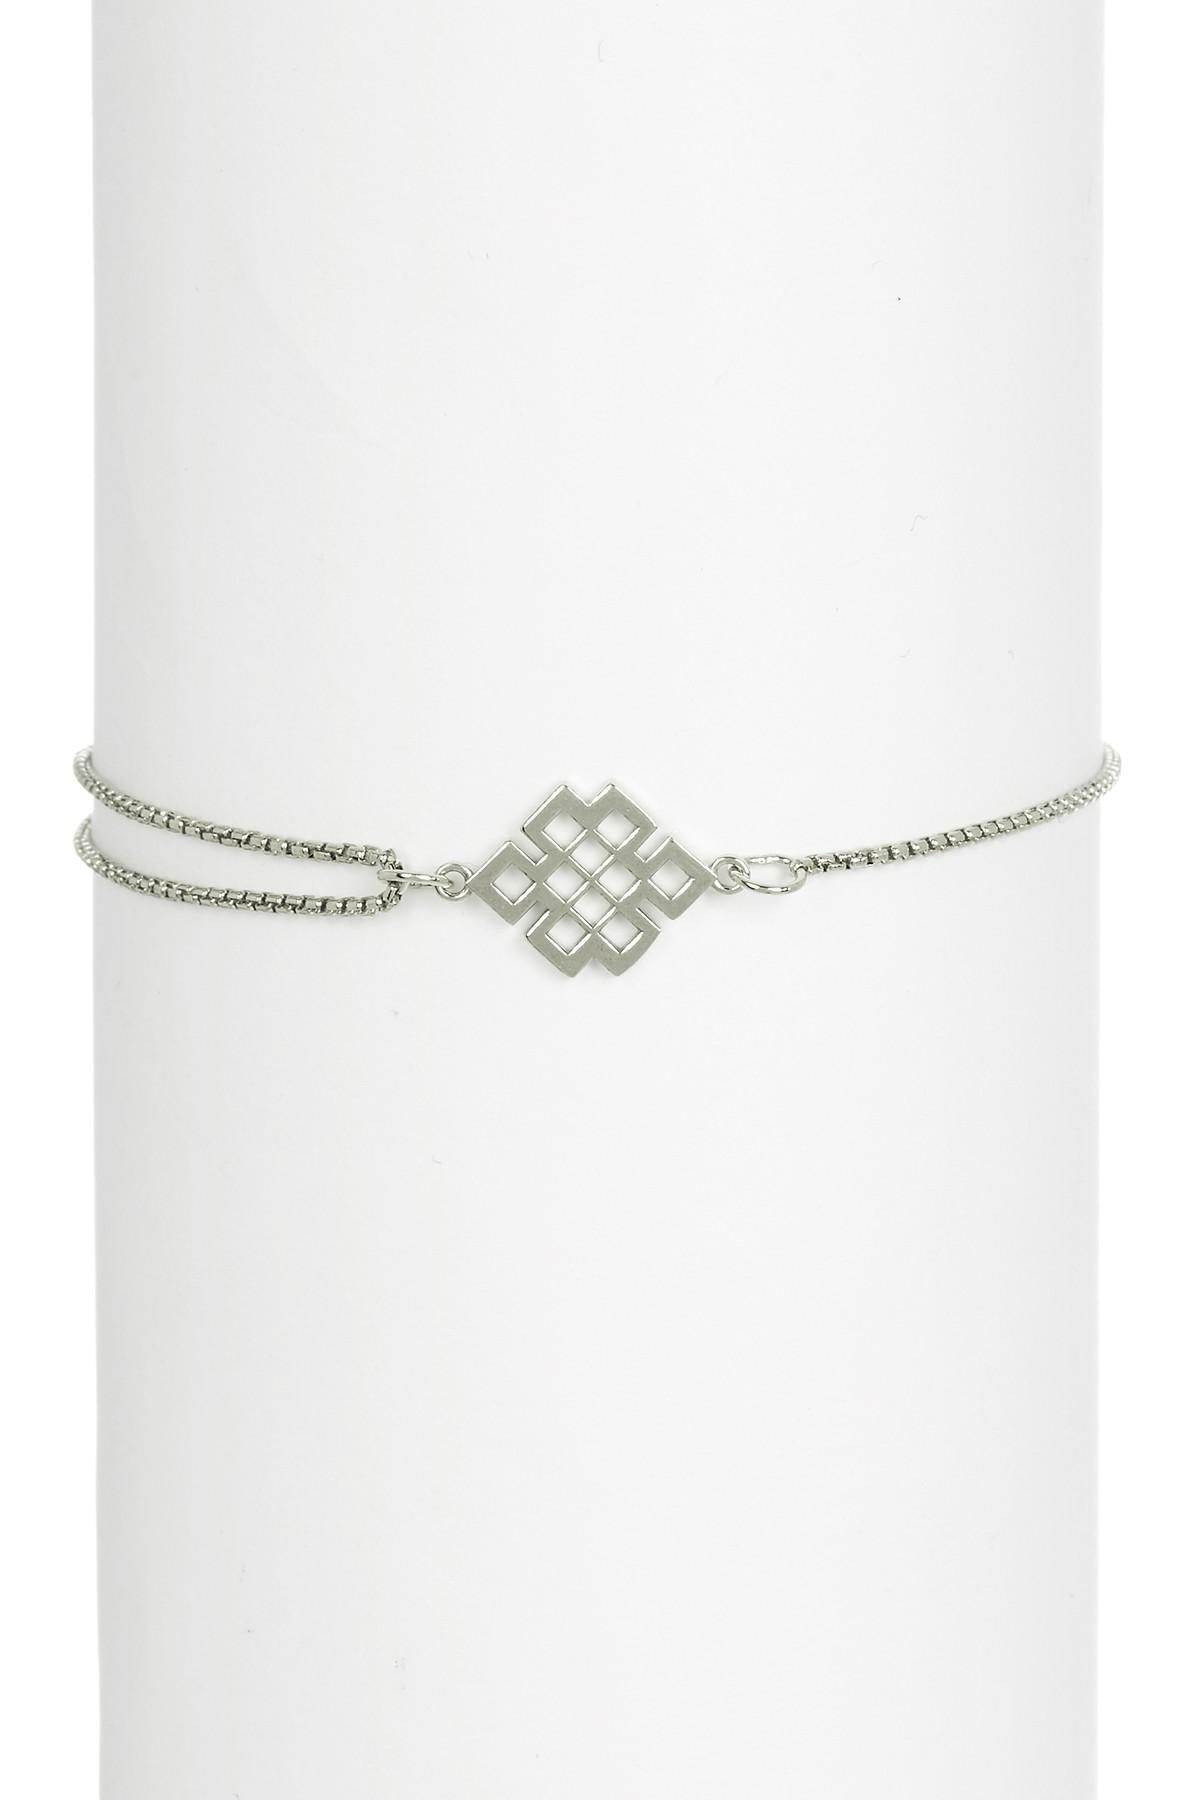 ALEX AND ANI Sterling Silver Endless Knot Charm Pull Chain ...